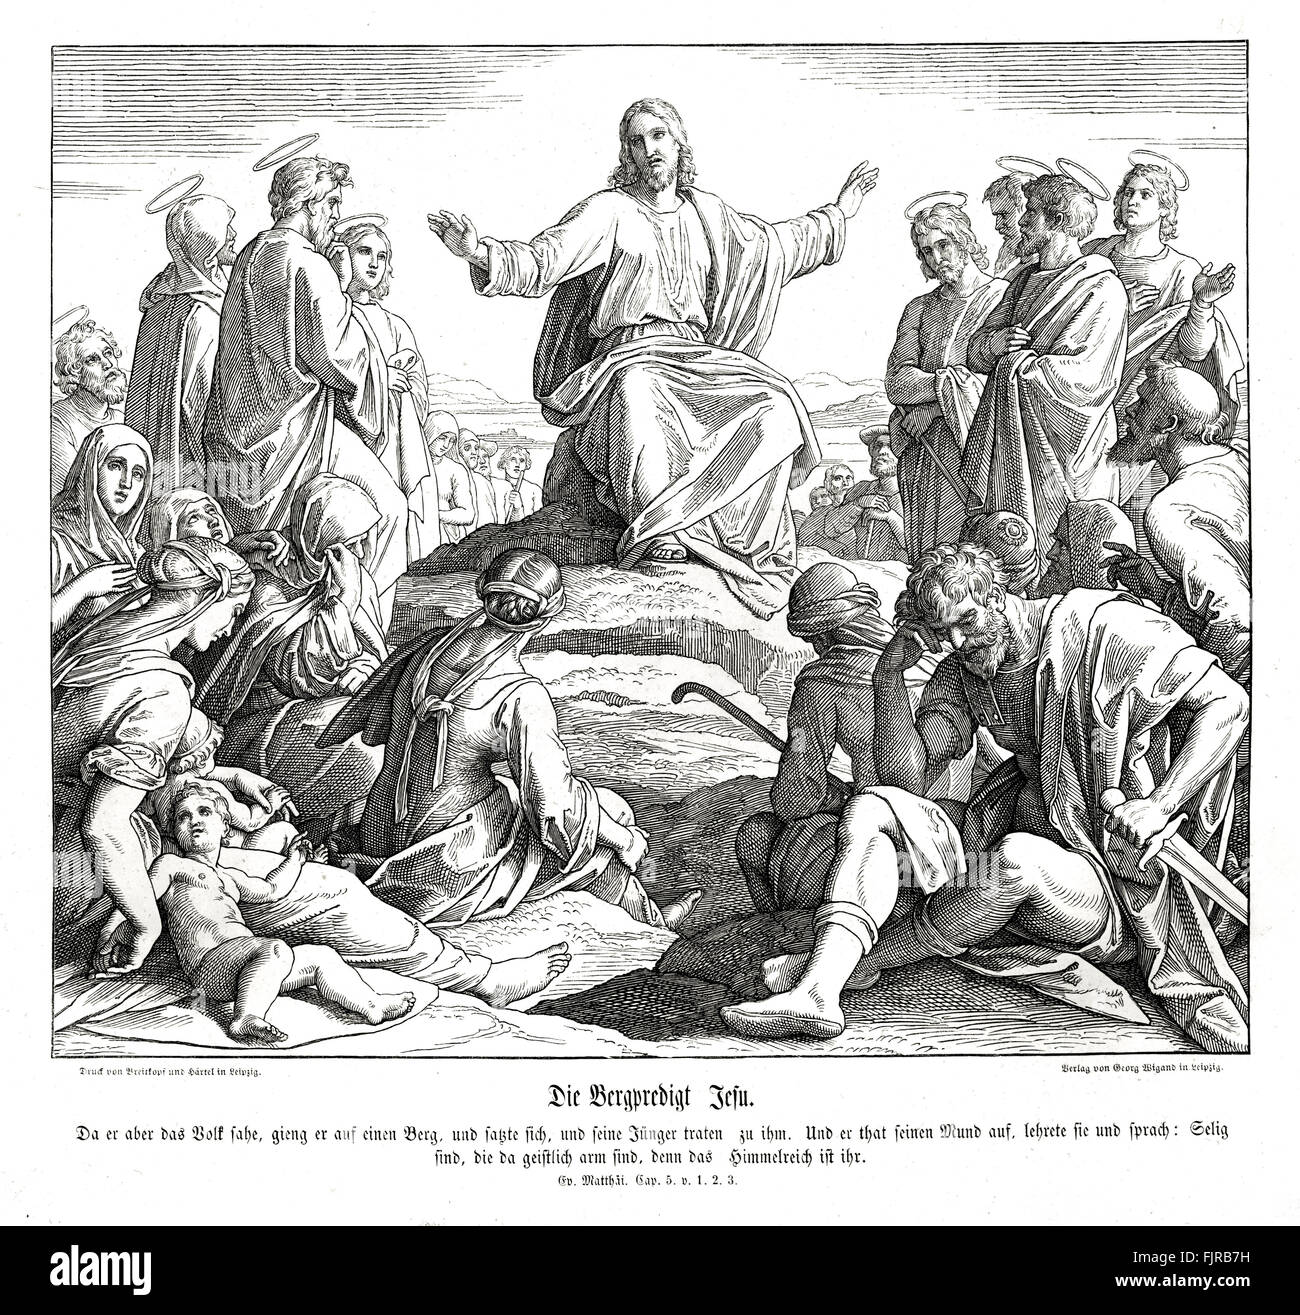 Sermon on the Mount, Gospel of Matthew chapter V verses 1 - 3 'And seeing the multitudes, he went up into a mountain: and when he was set, his disciples came unto him: And he opened his mouth, and taught them, saying, Blessed are the poor in spirit: for theirs is the kingdom of heaven.' 1852-60 illustration by Julius Schnorr von Carolsfeld Stock Photo